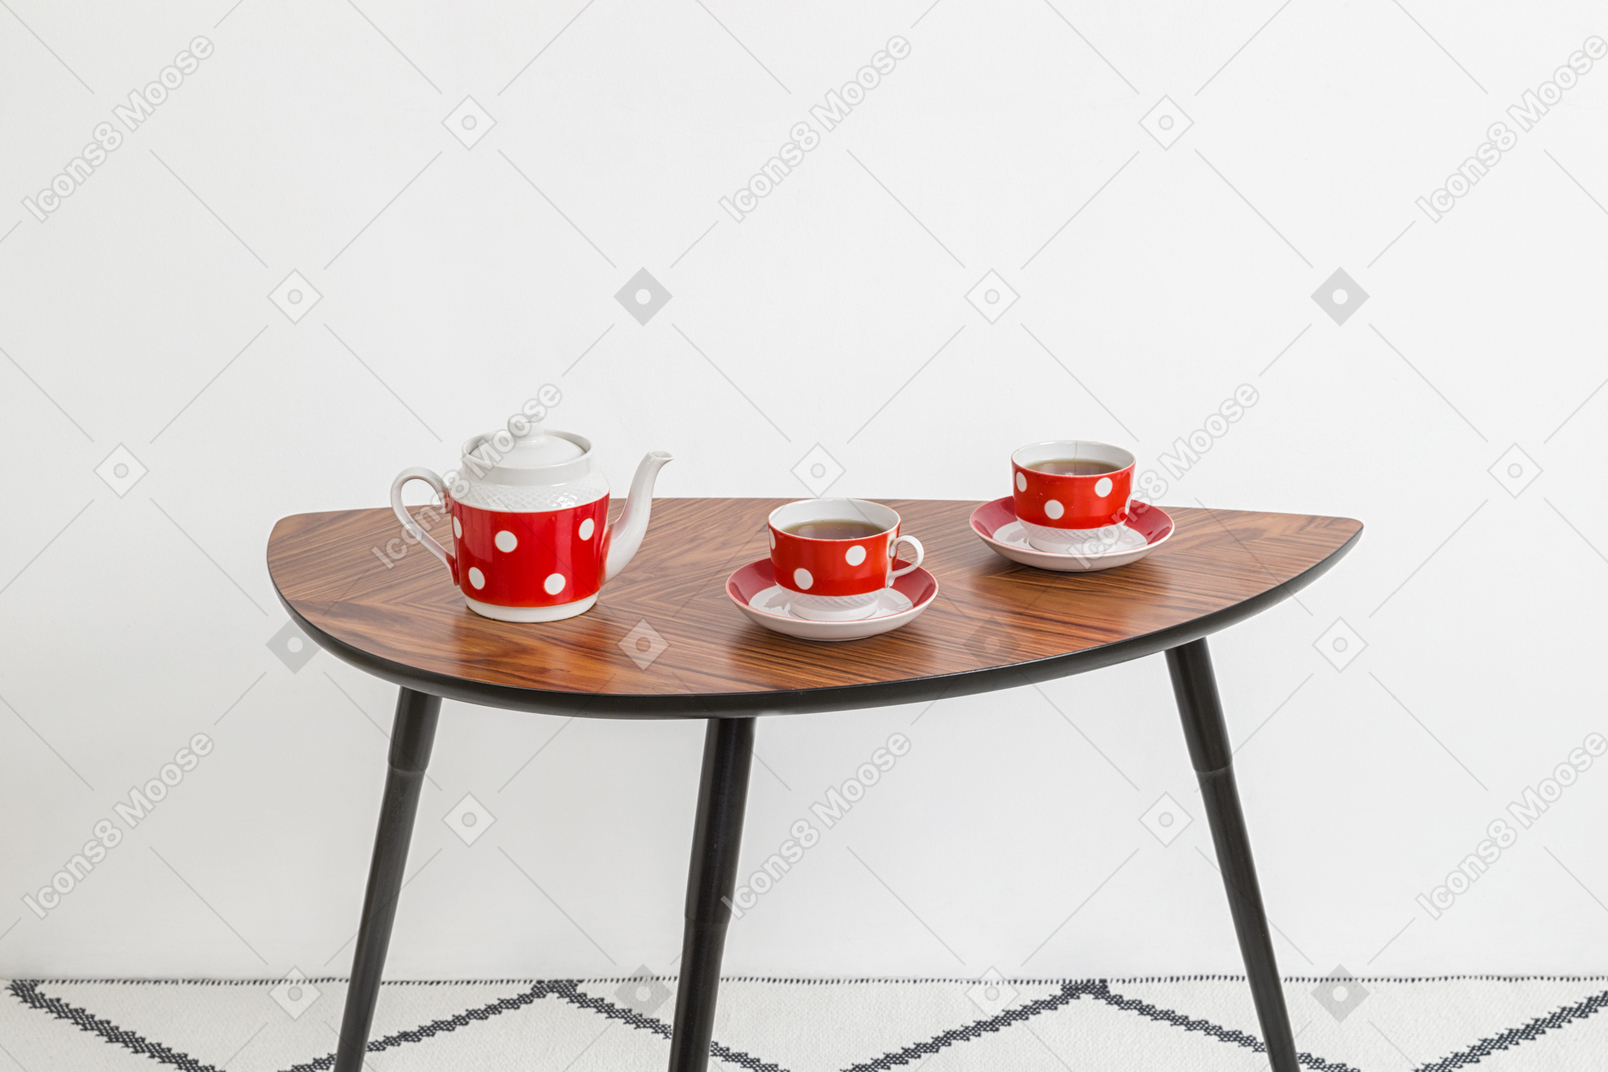 Tea party table setting